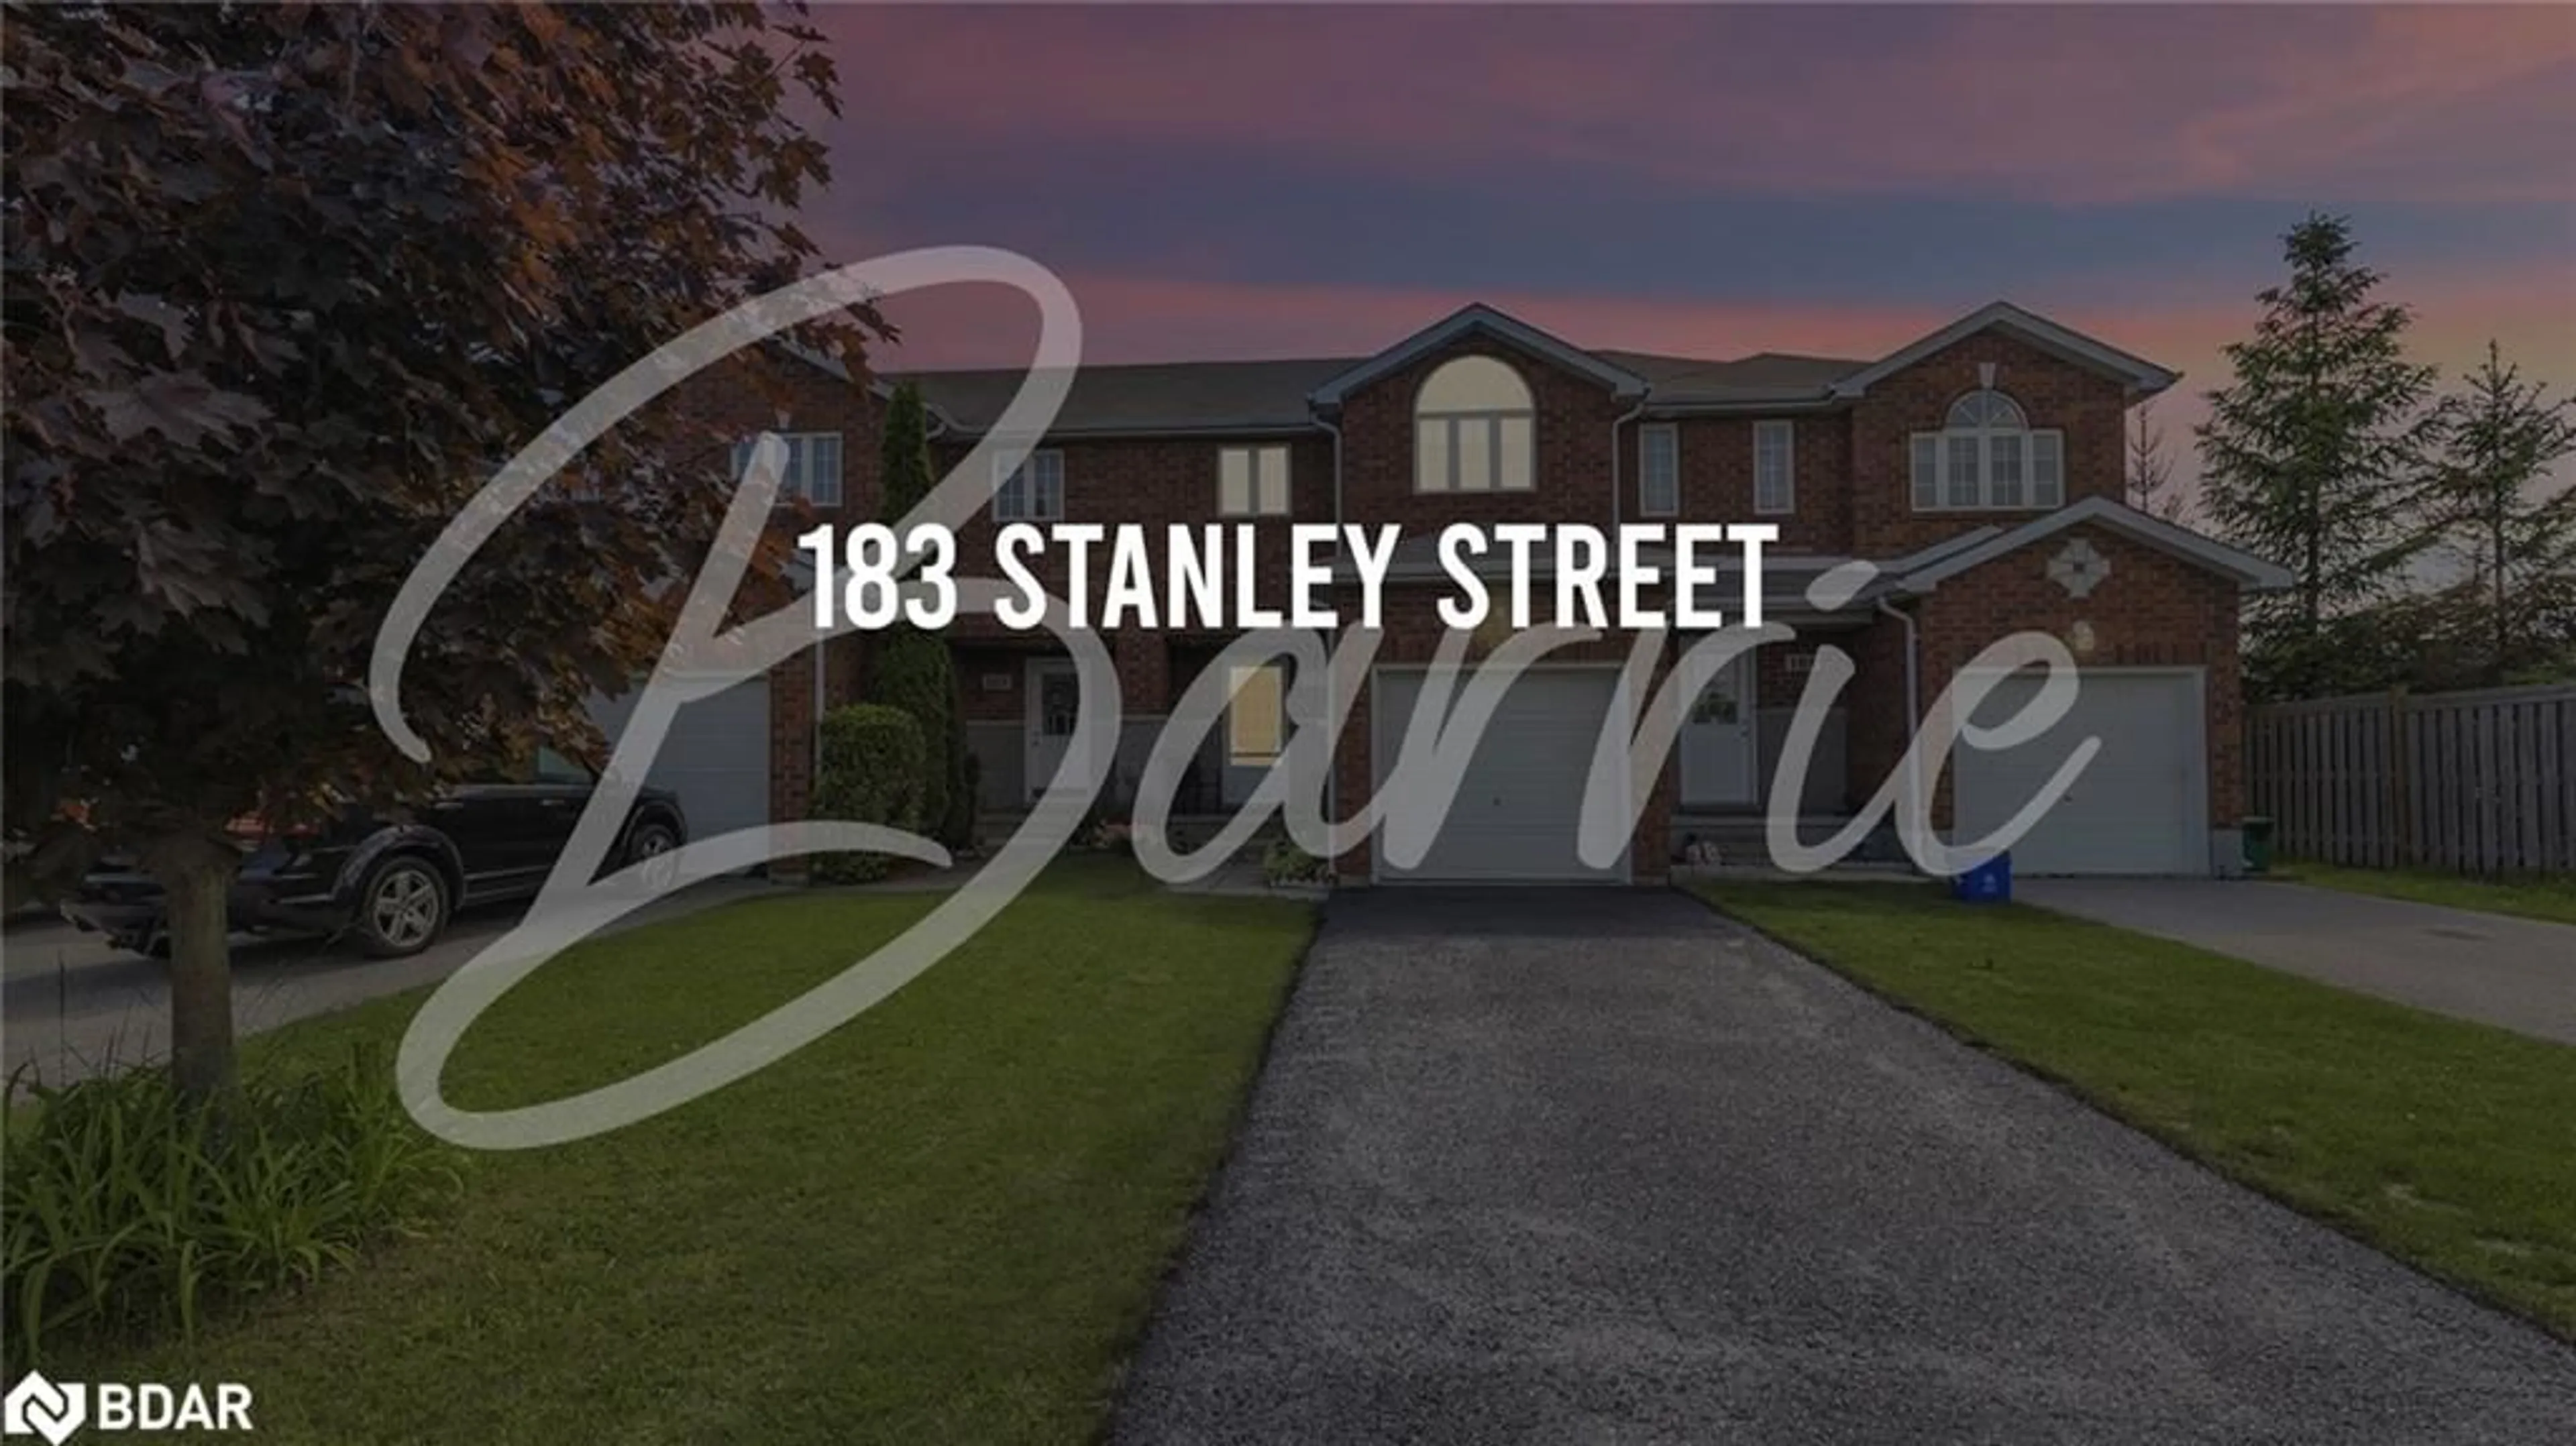 Street view for 183 Stanley St, Barrie Ontario L4M 6X9